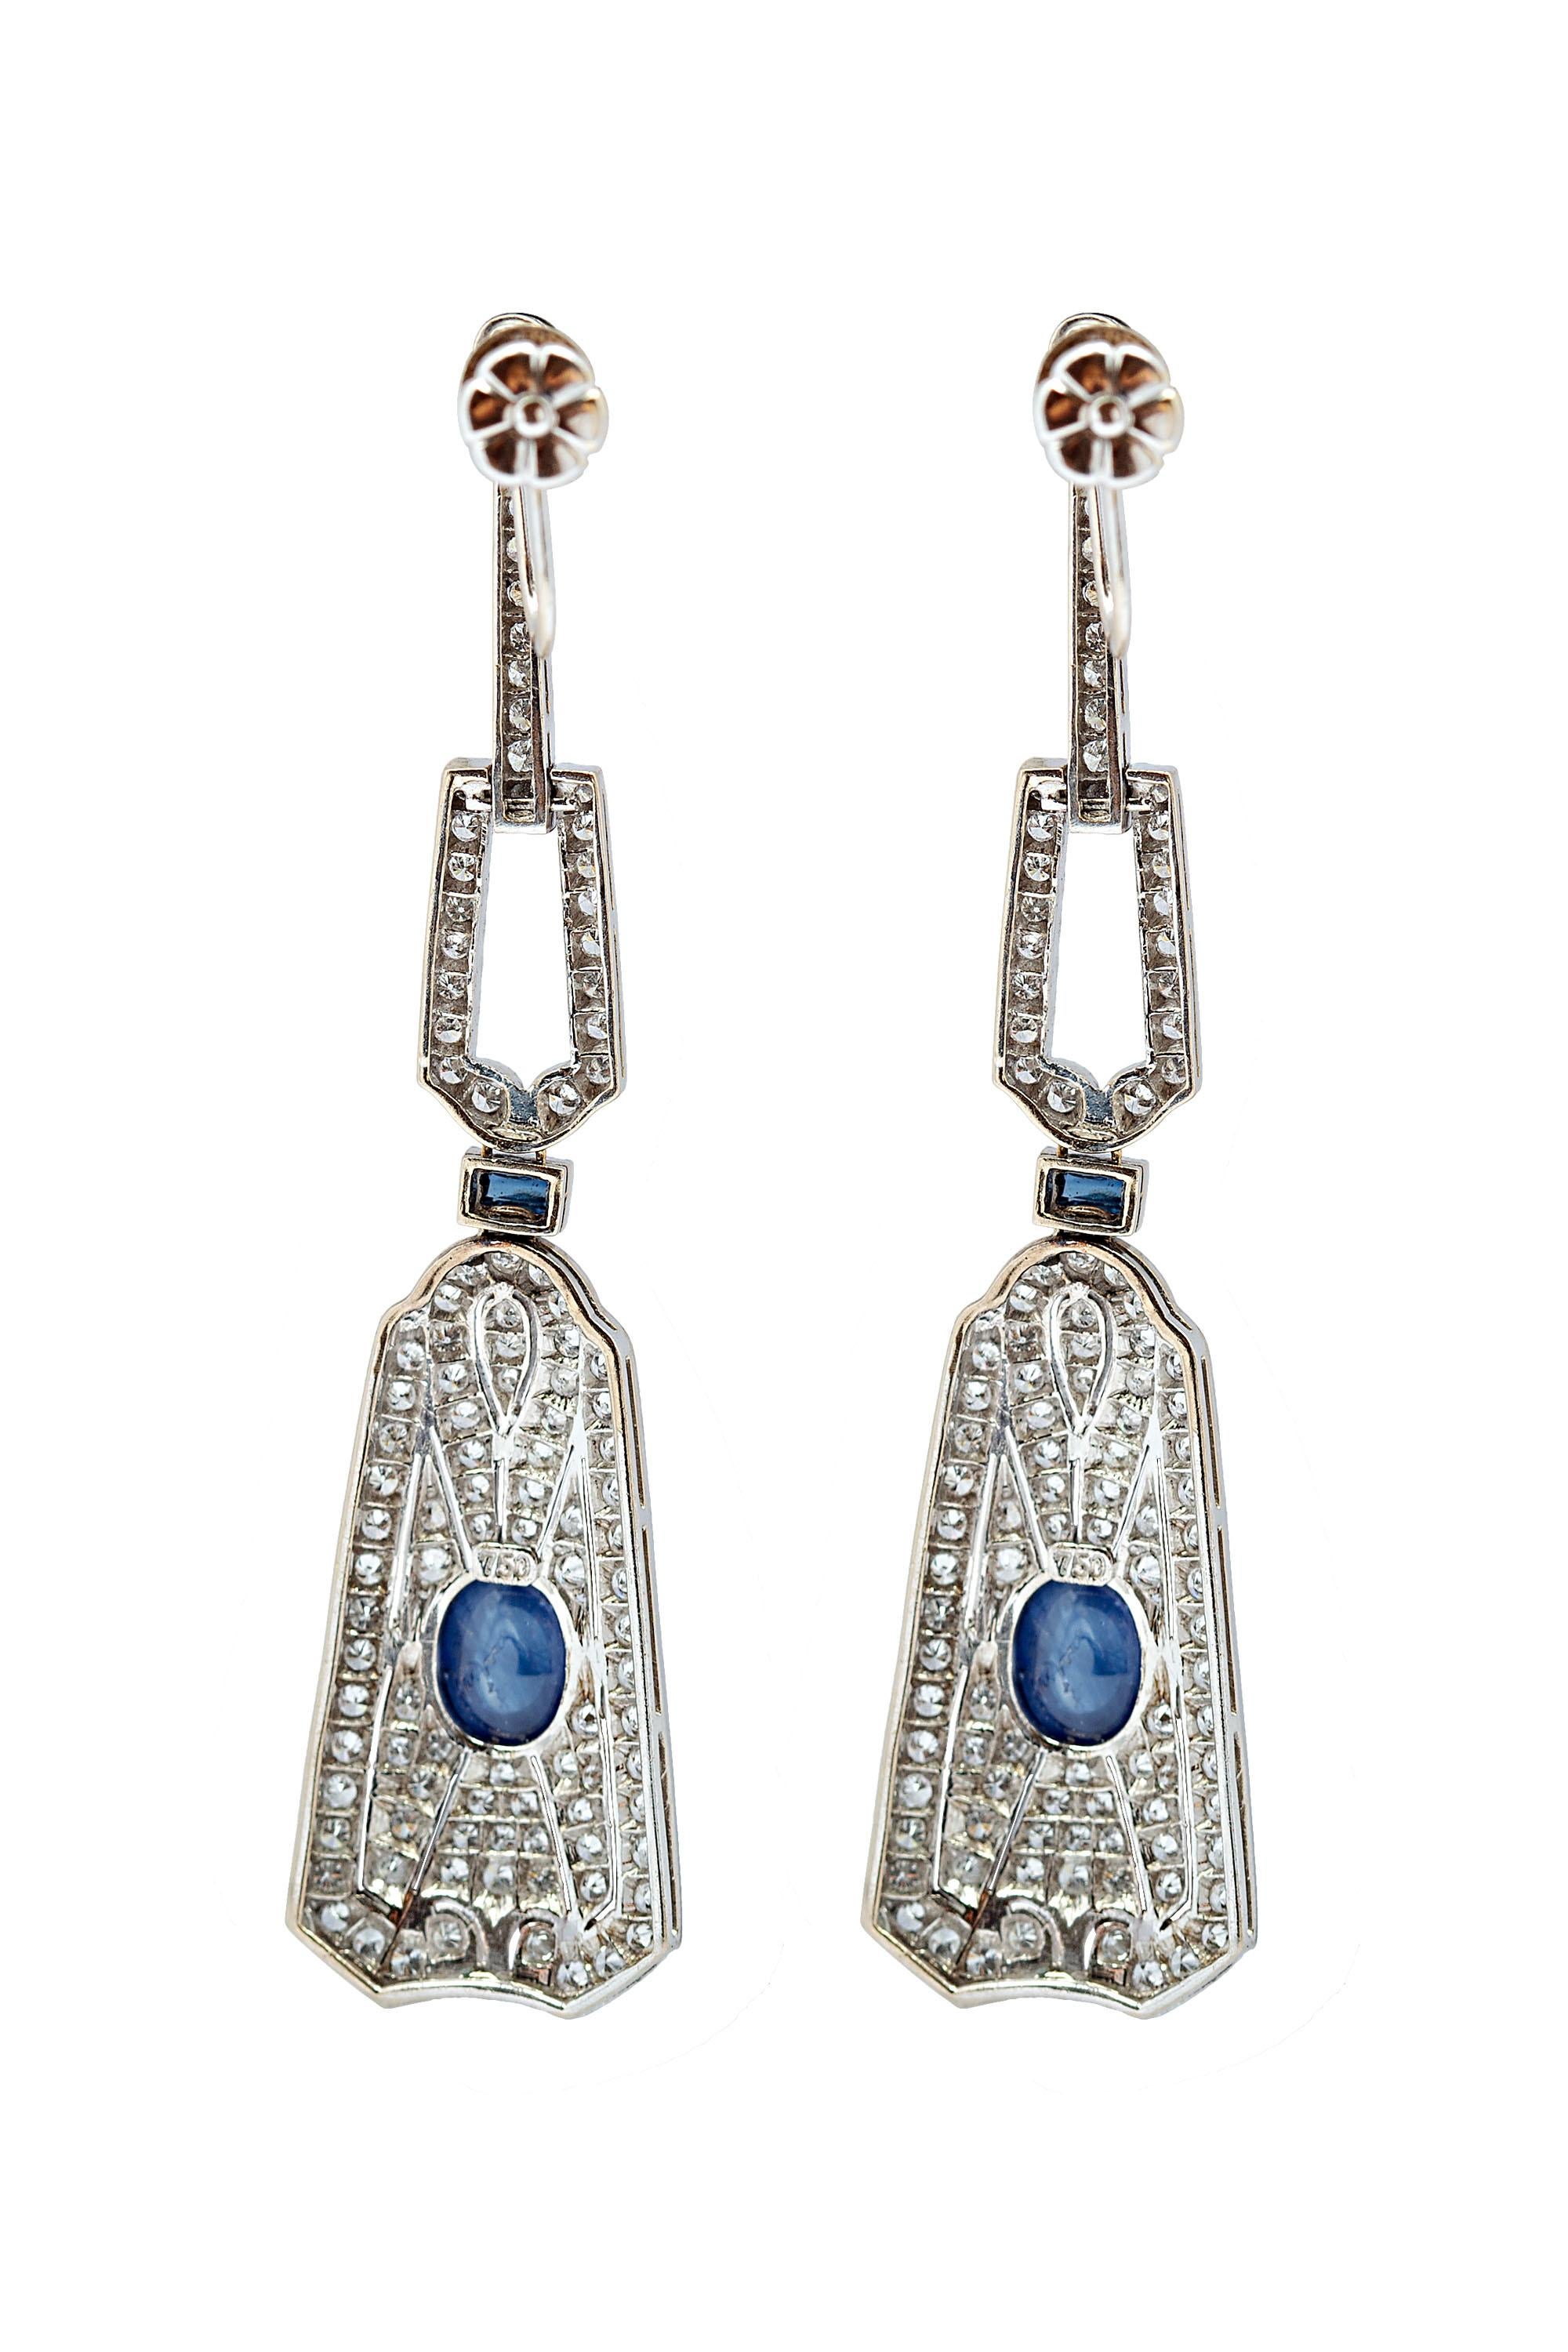 Art Deco Style Cabochon Sapphire and Diamond Drop Earrings 14K White Gold In Excellent Condition For Sale In beverly hills, CA